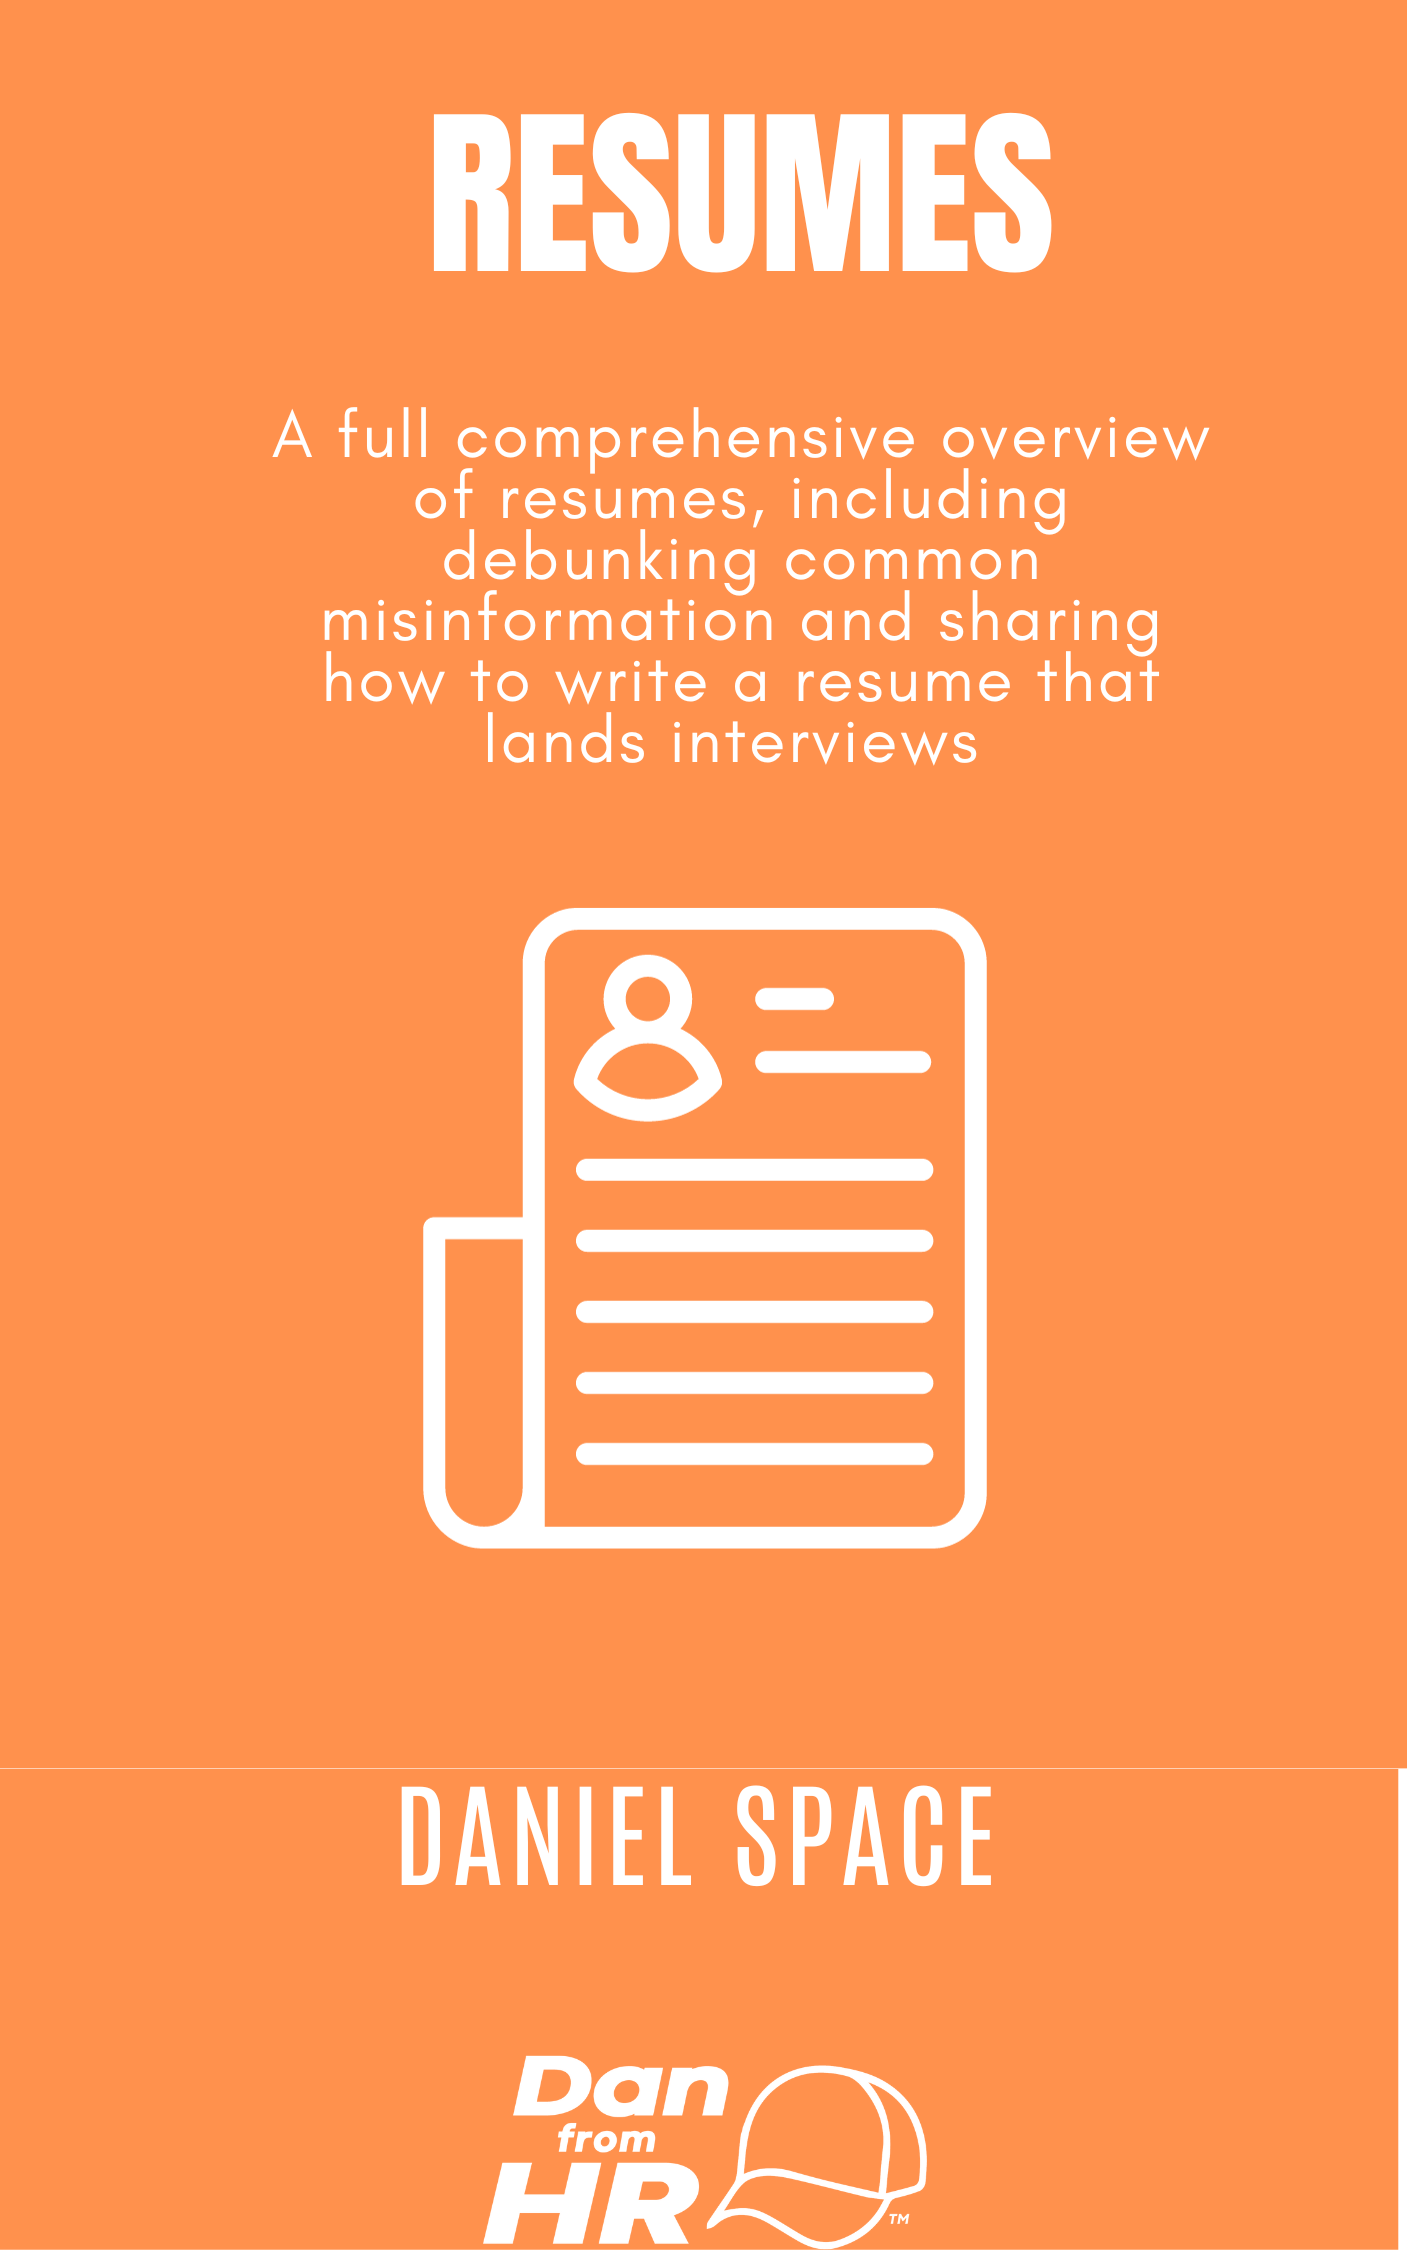 RESUMES - COMPREHENSIVE GUIDE